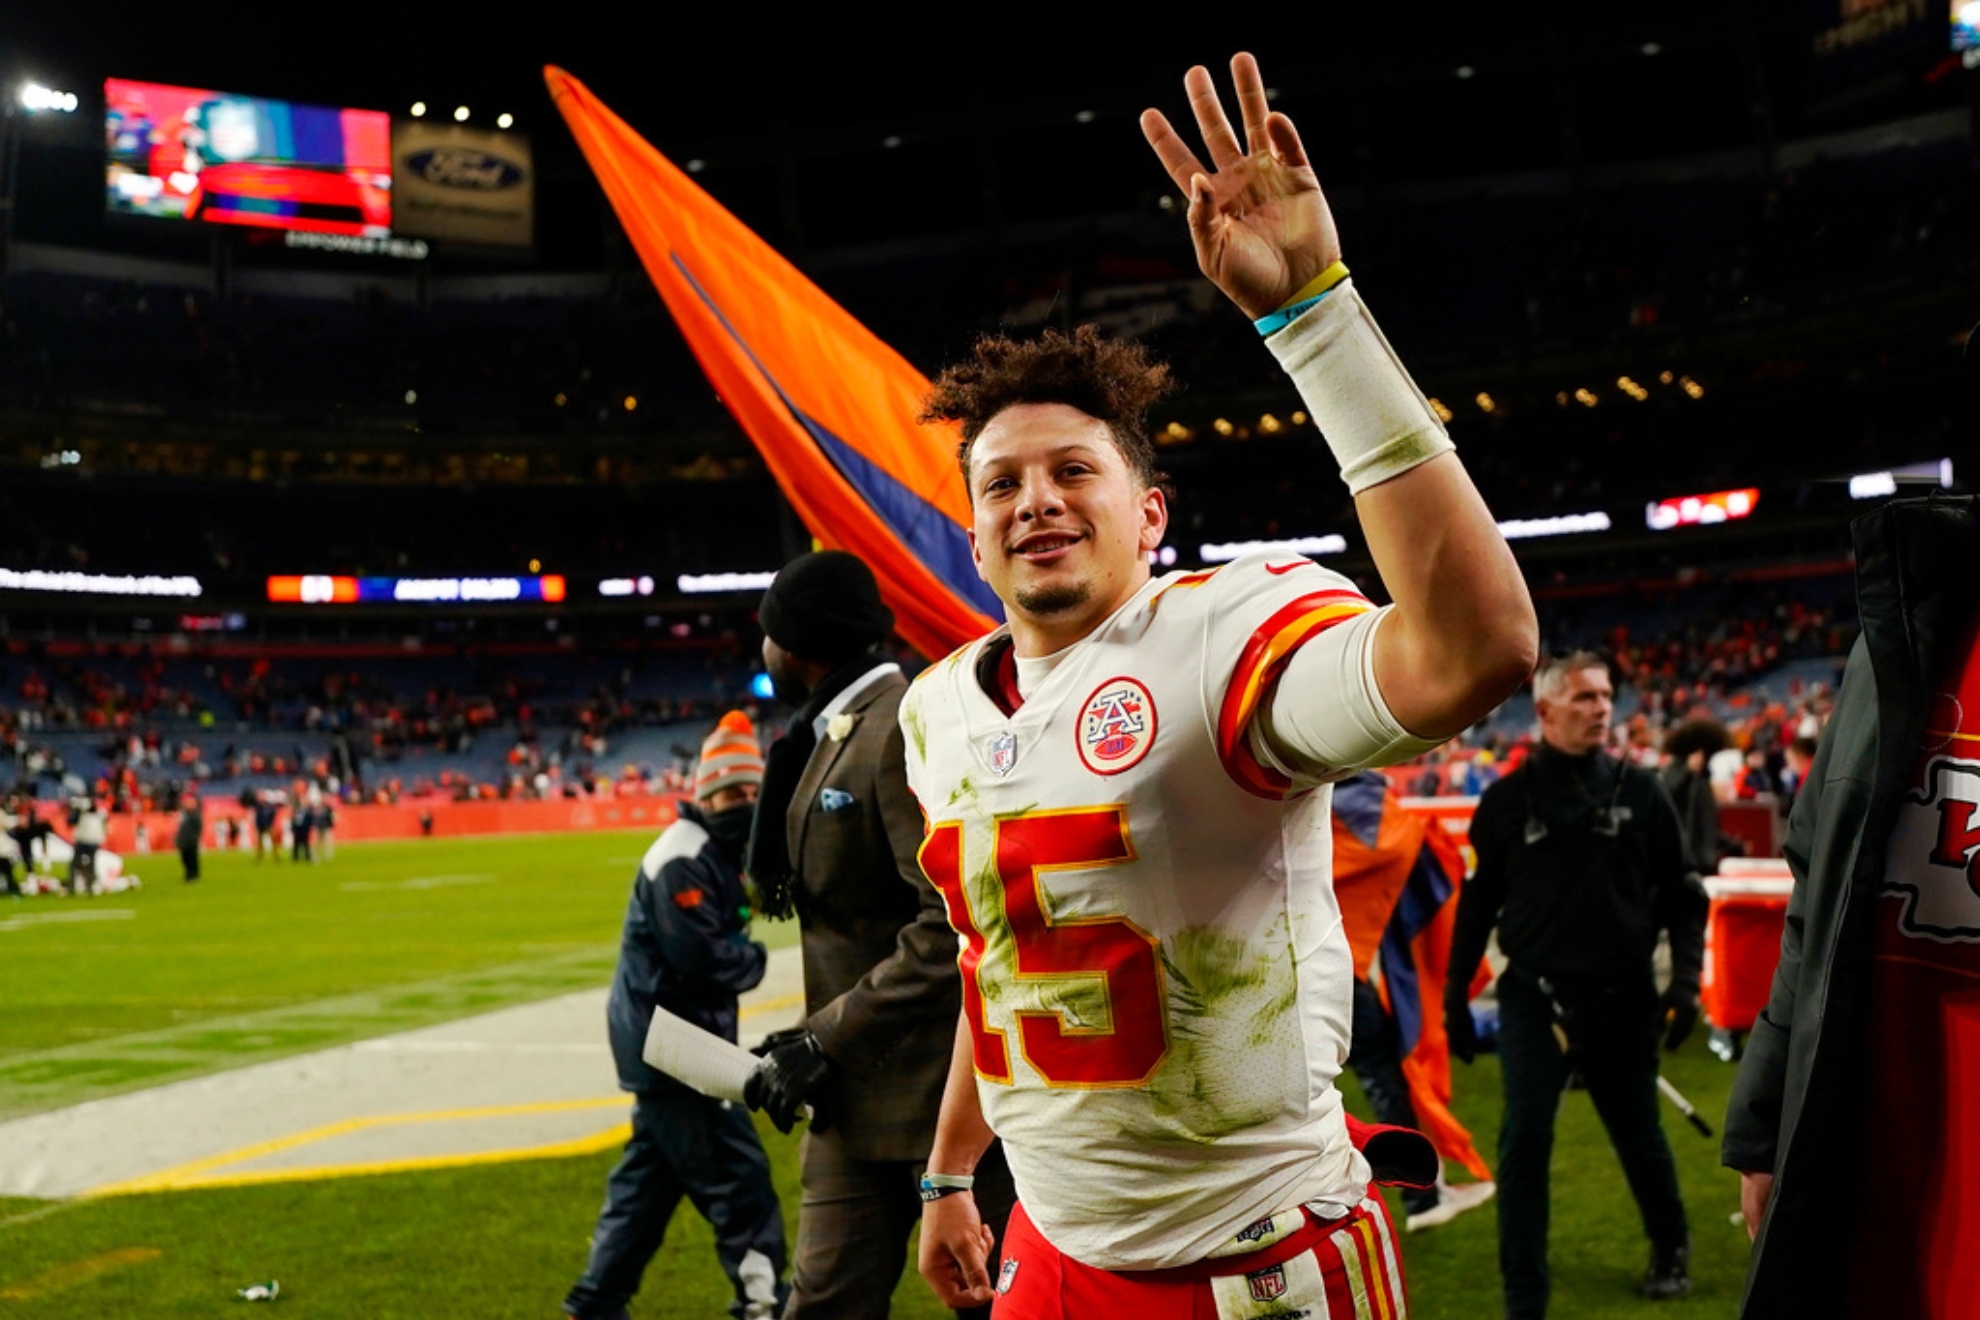 Broncos vs. Chiefs: The best player prop bets for SNF